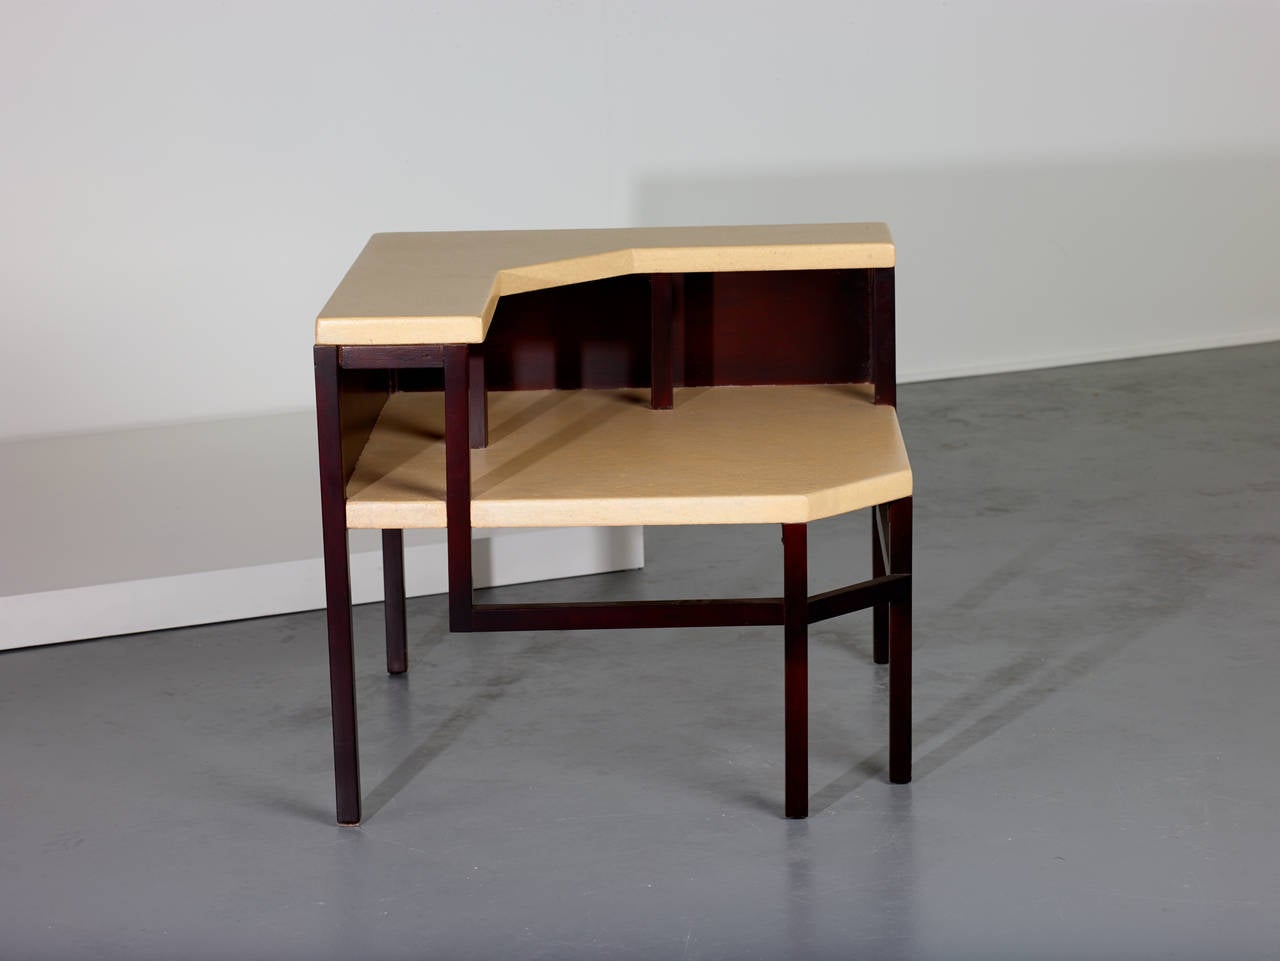 American Paul Frankl Corner Tables, Lacquered Cork and Mahogany, 1951 For Sale